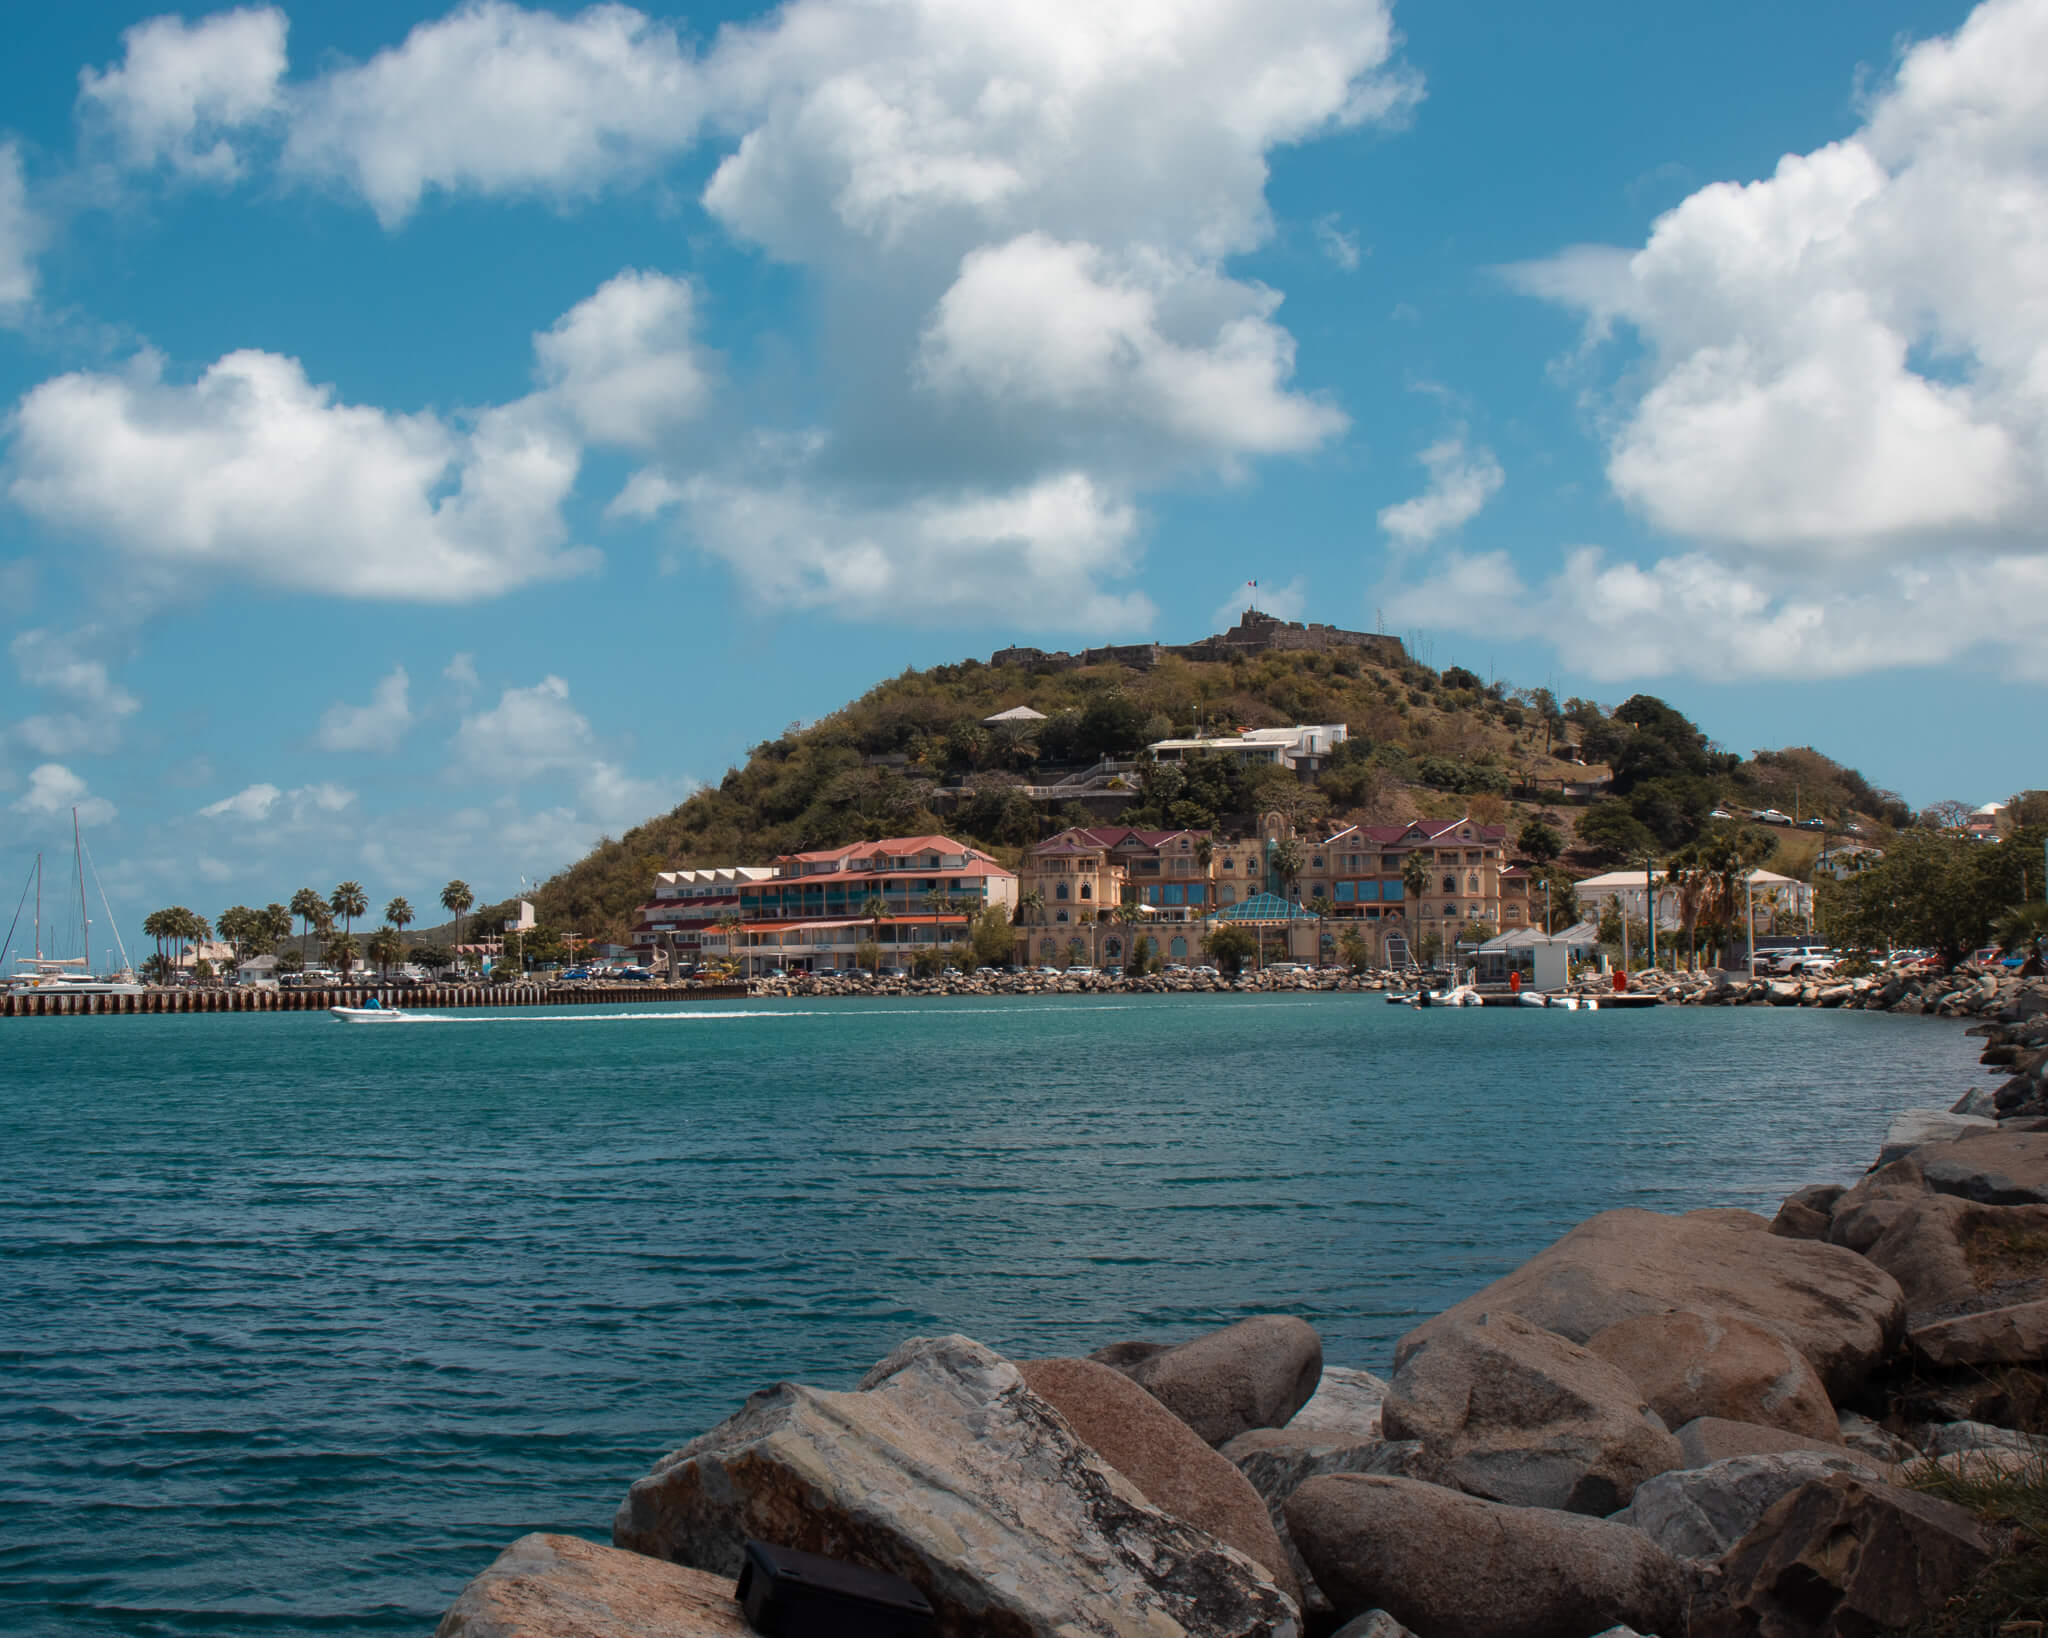 Waterfront of Marigot, capital of the Caribbean island of St Martin